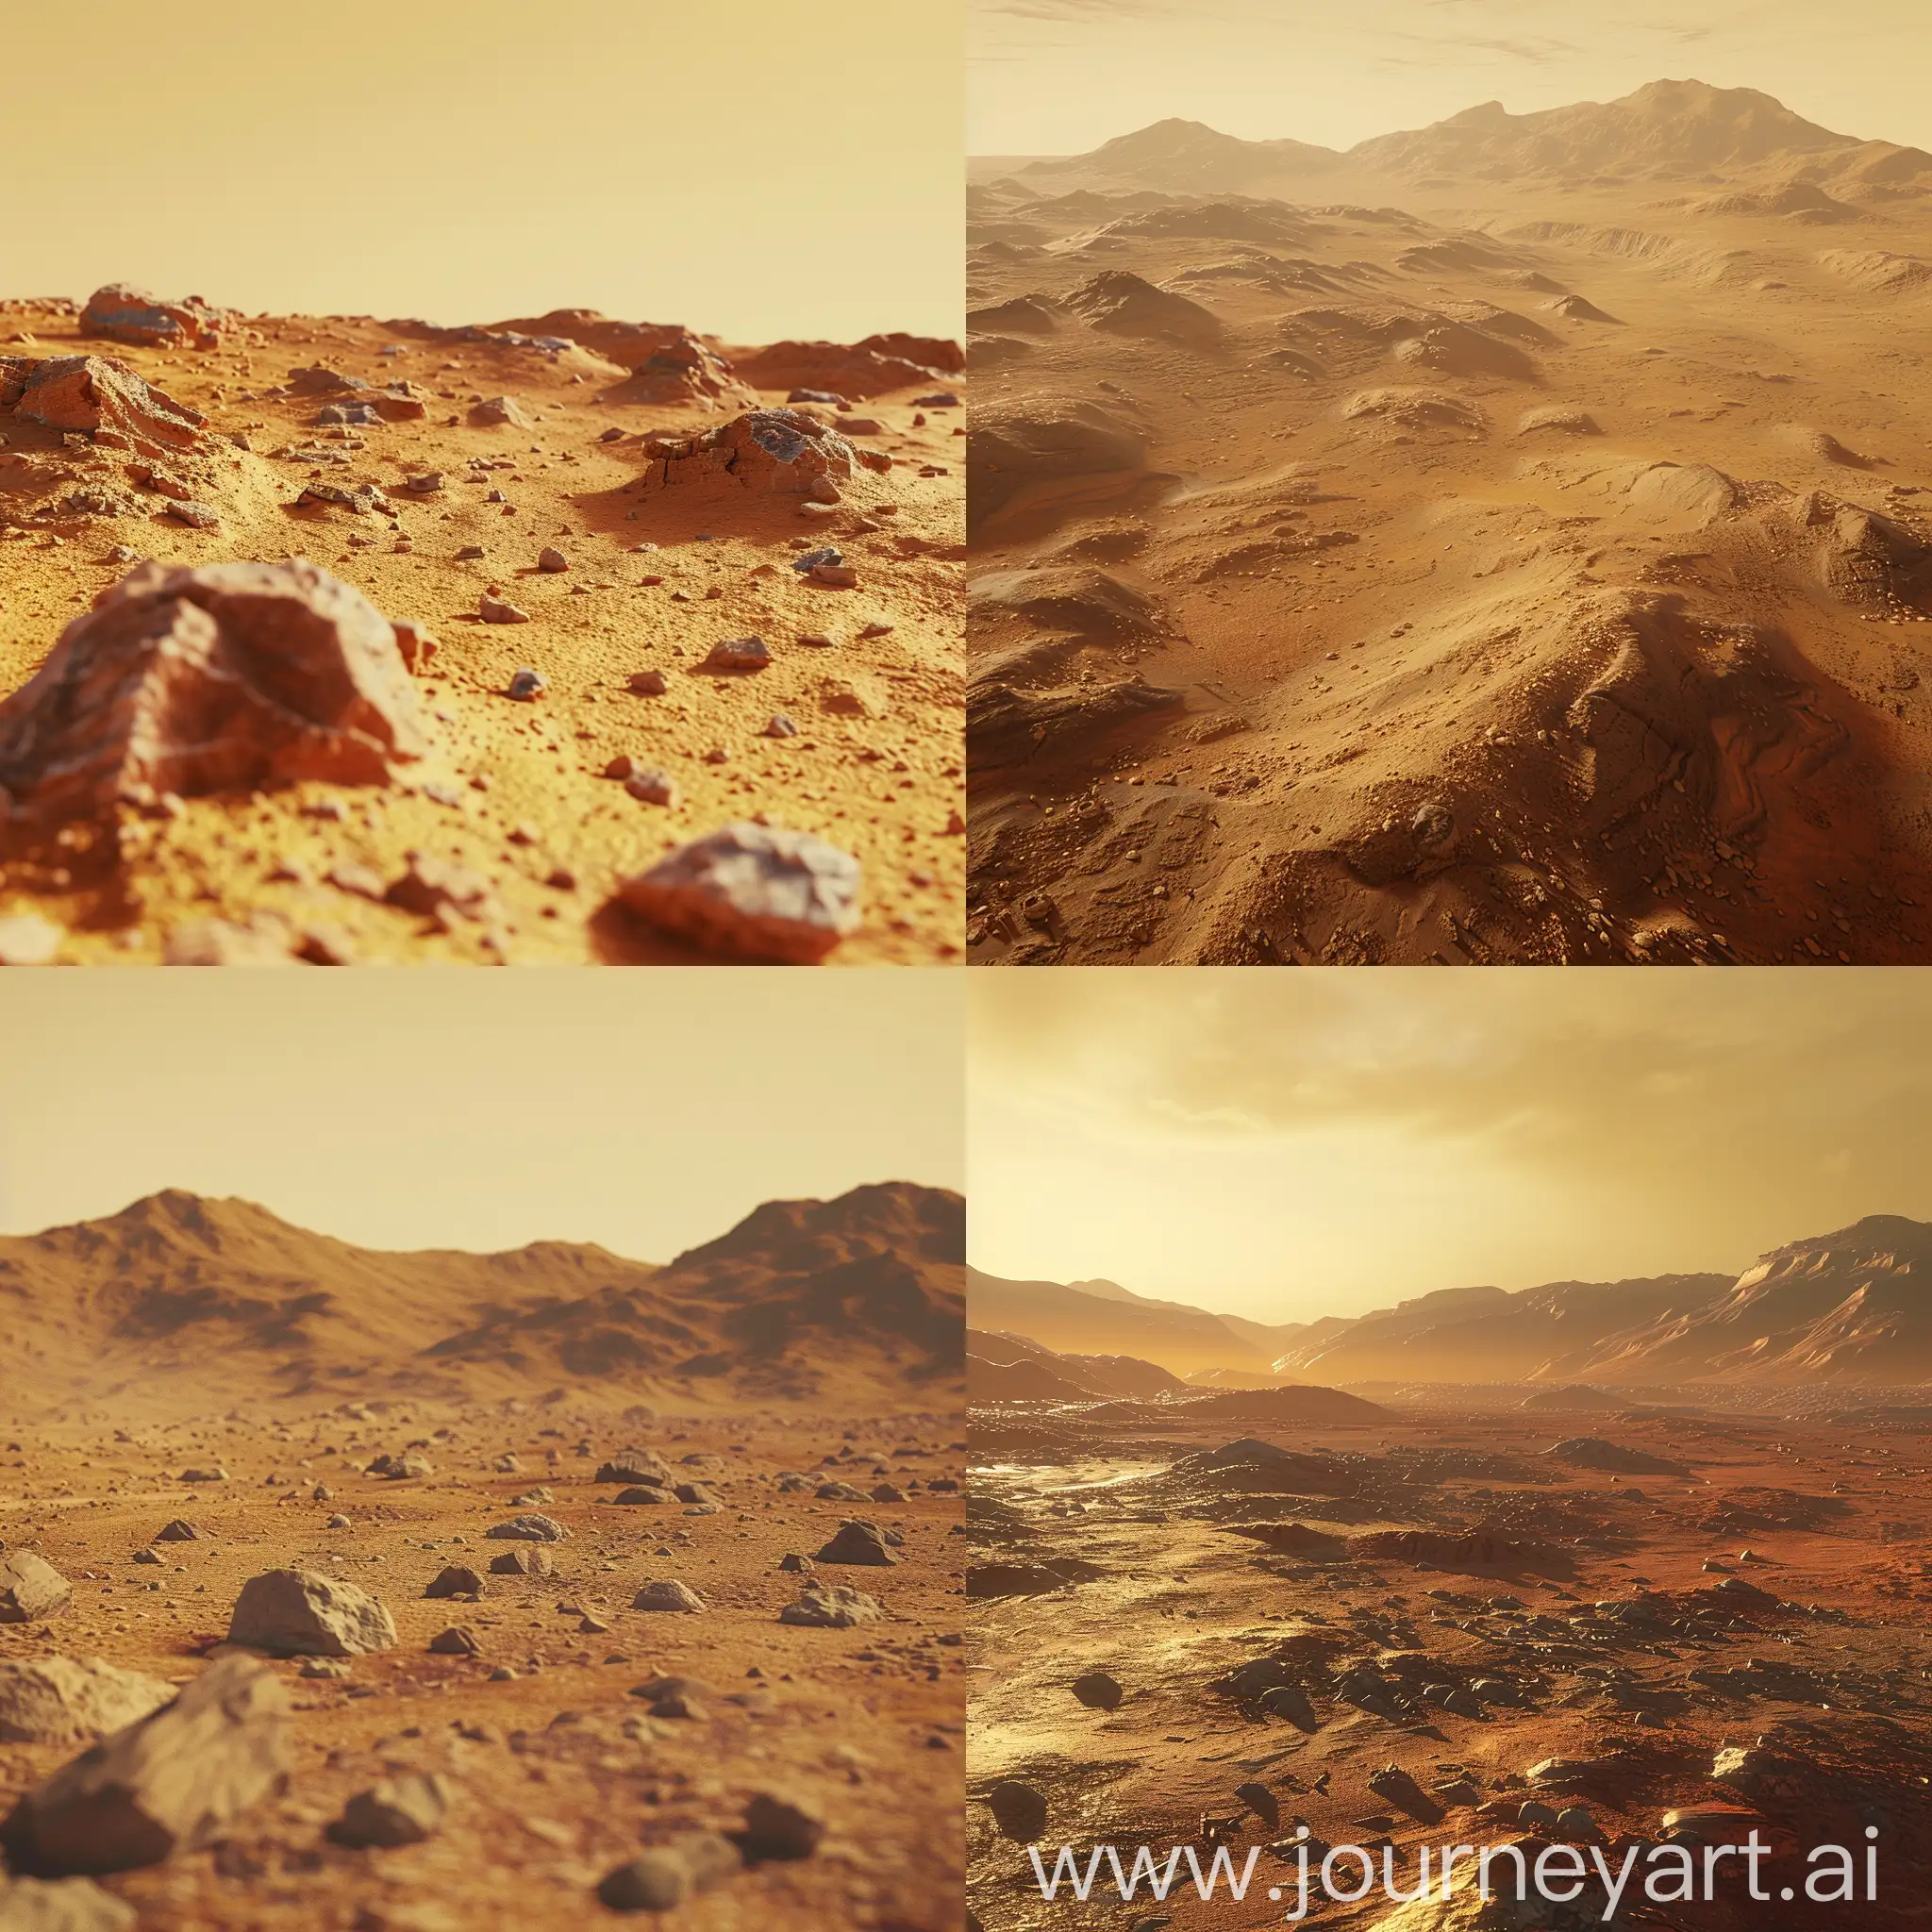 Desert-Landscape-with-Red-Rock-Formations-and-YellowBrown-Sky